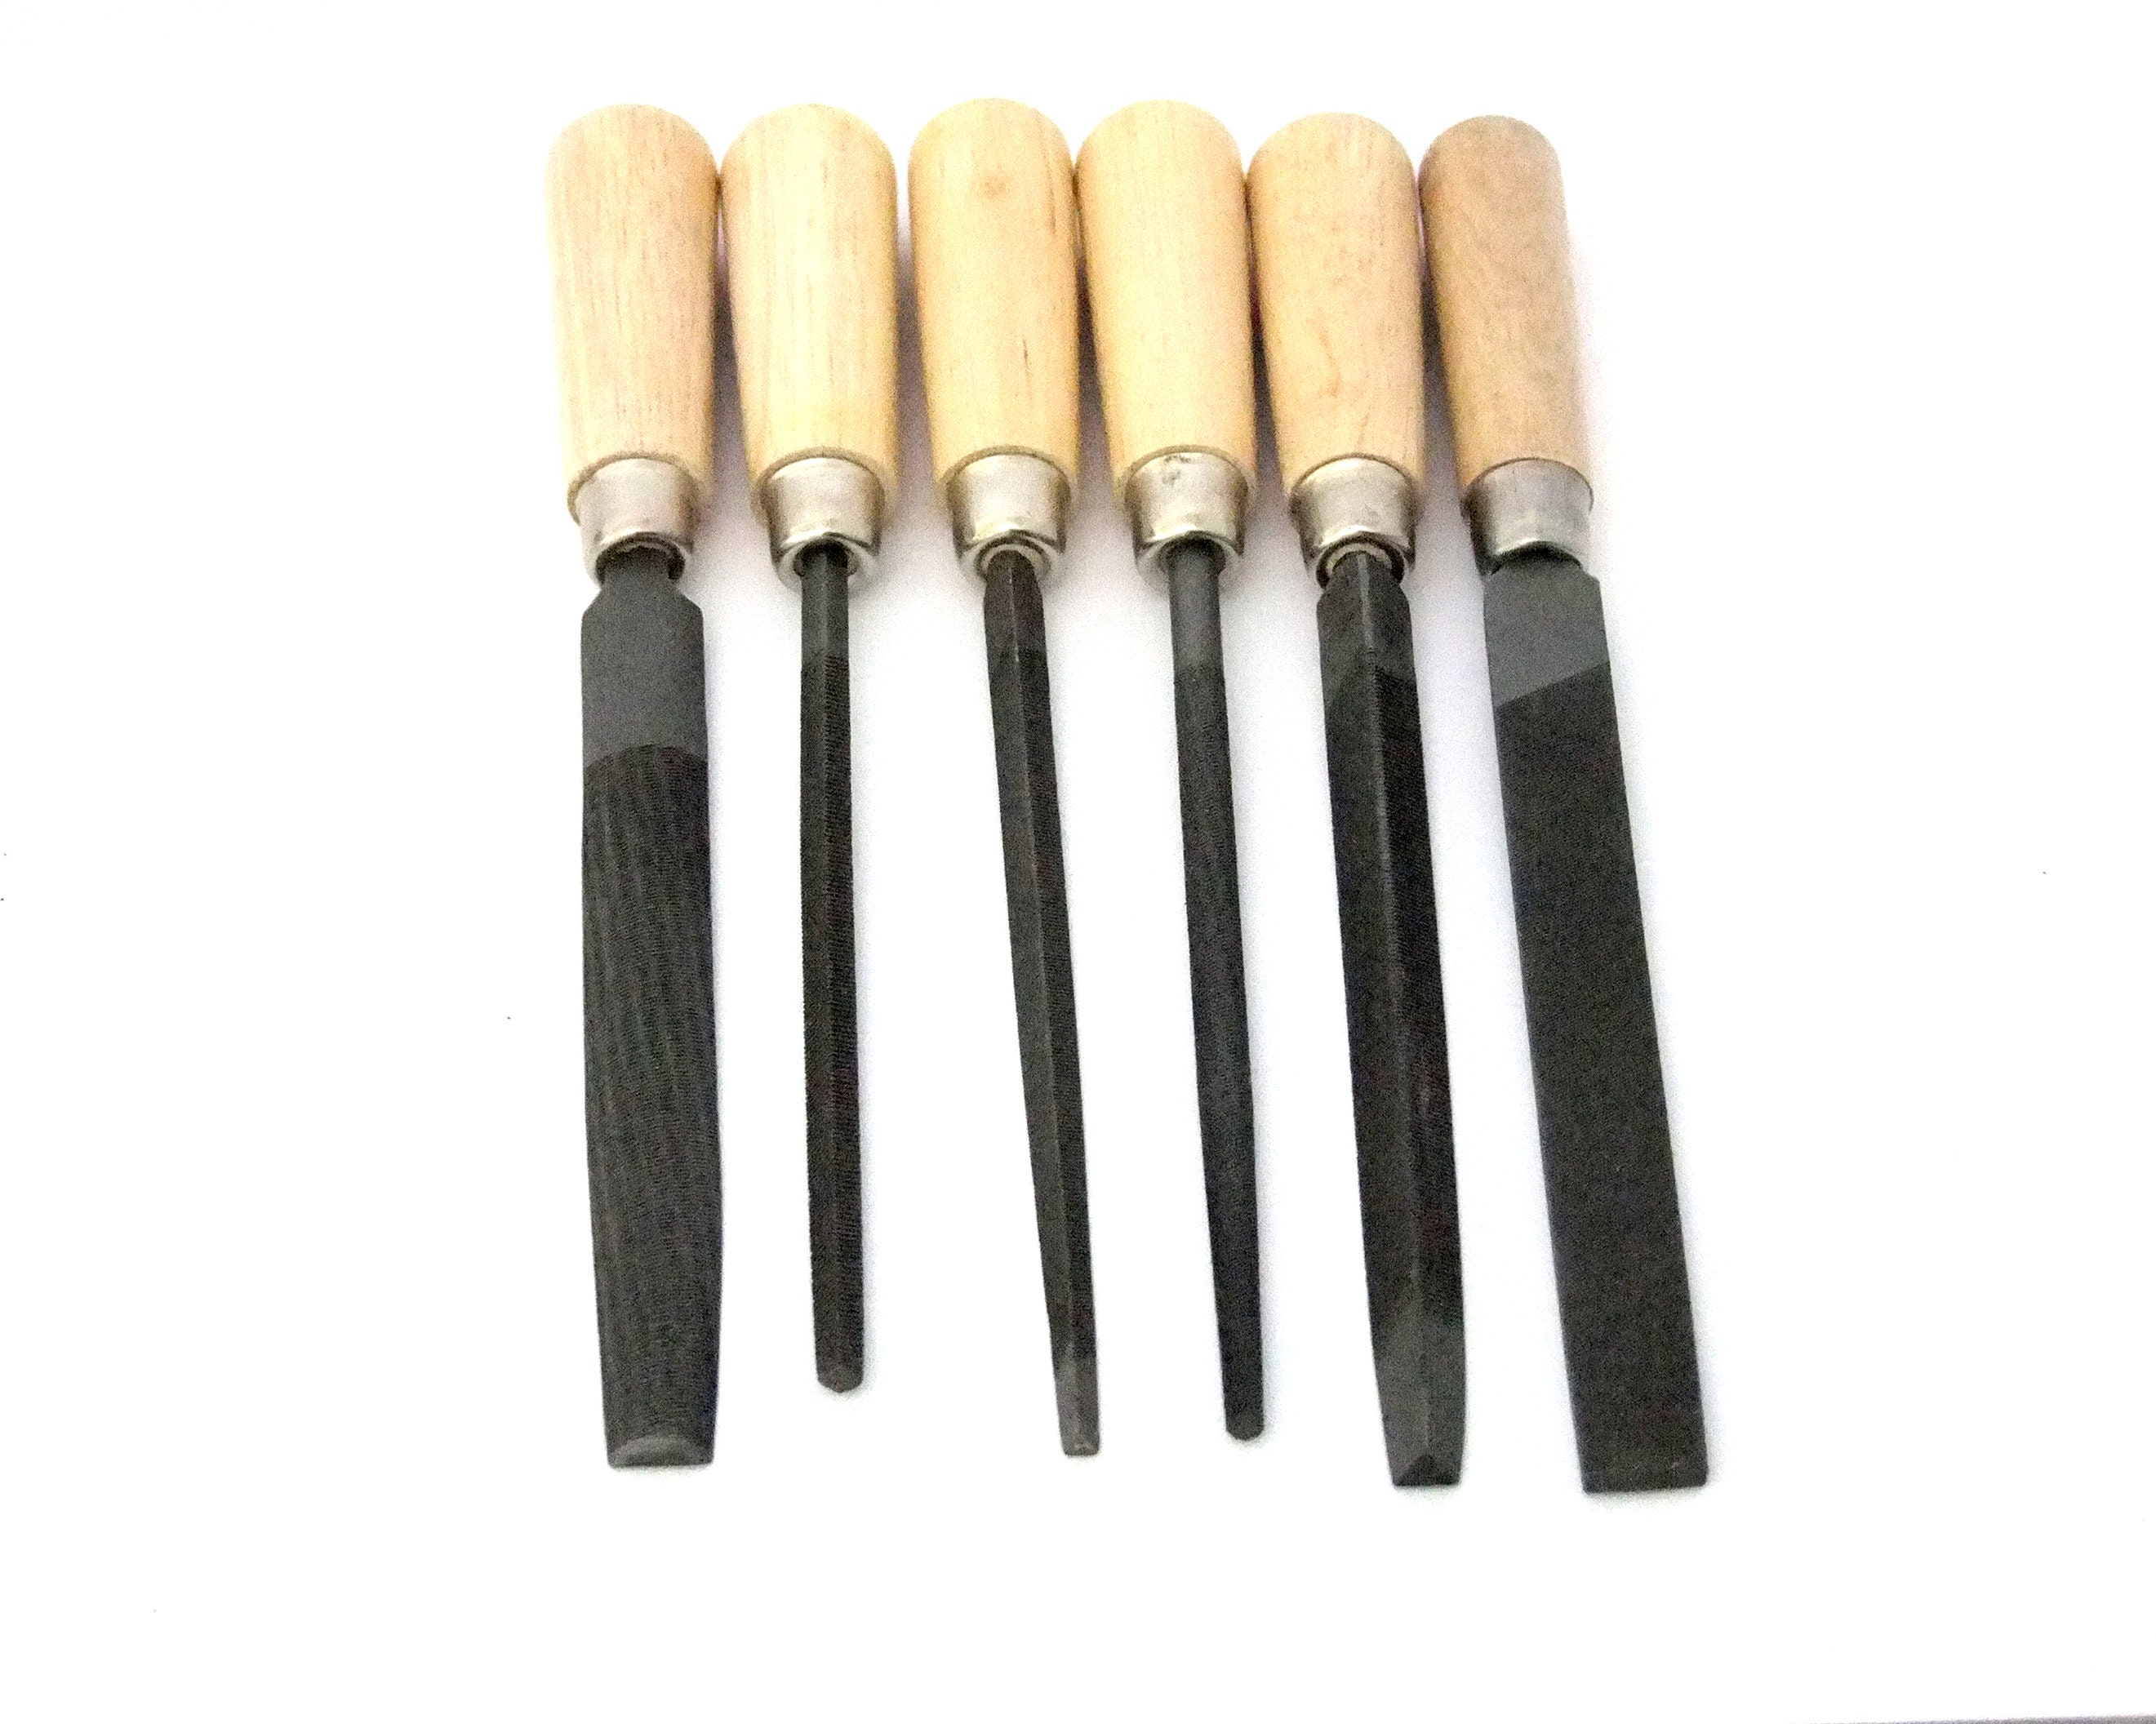 1 set of 6 erasing tips brass wire 0.12 mm Brushes